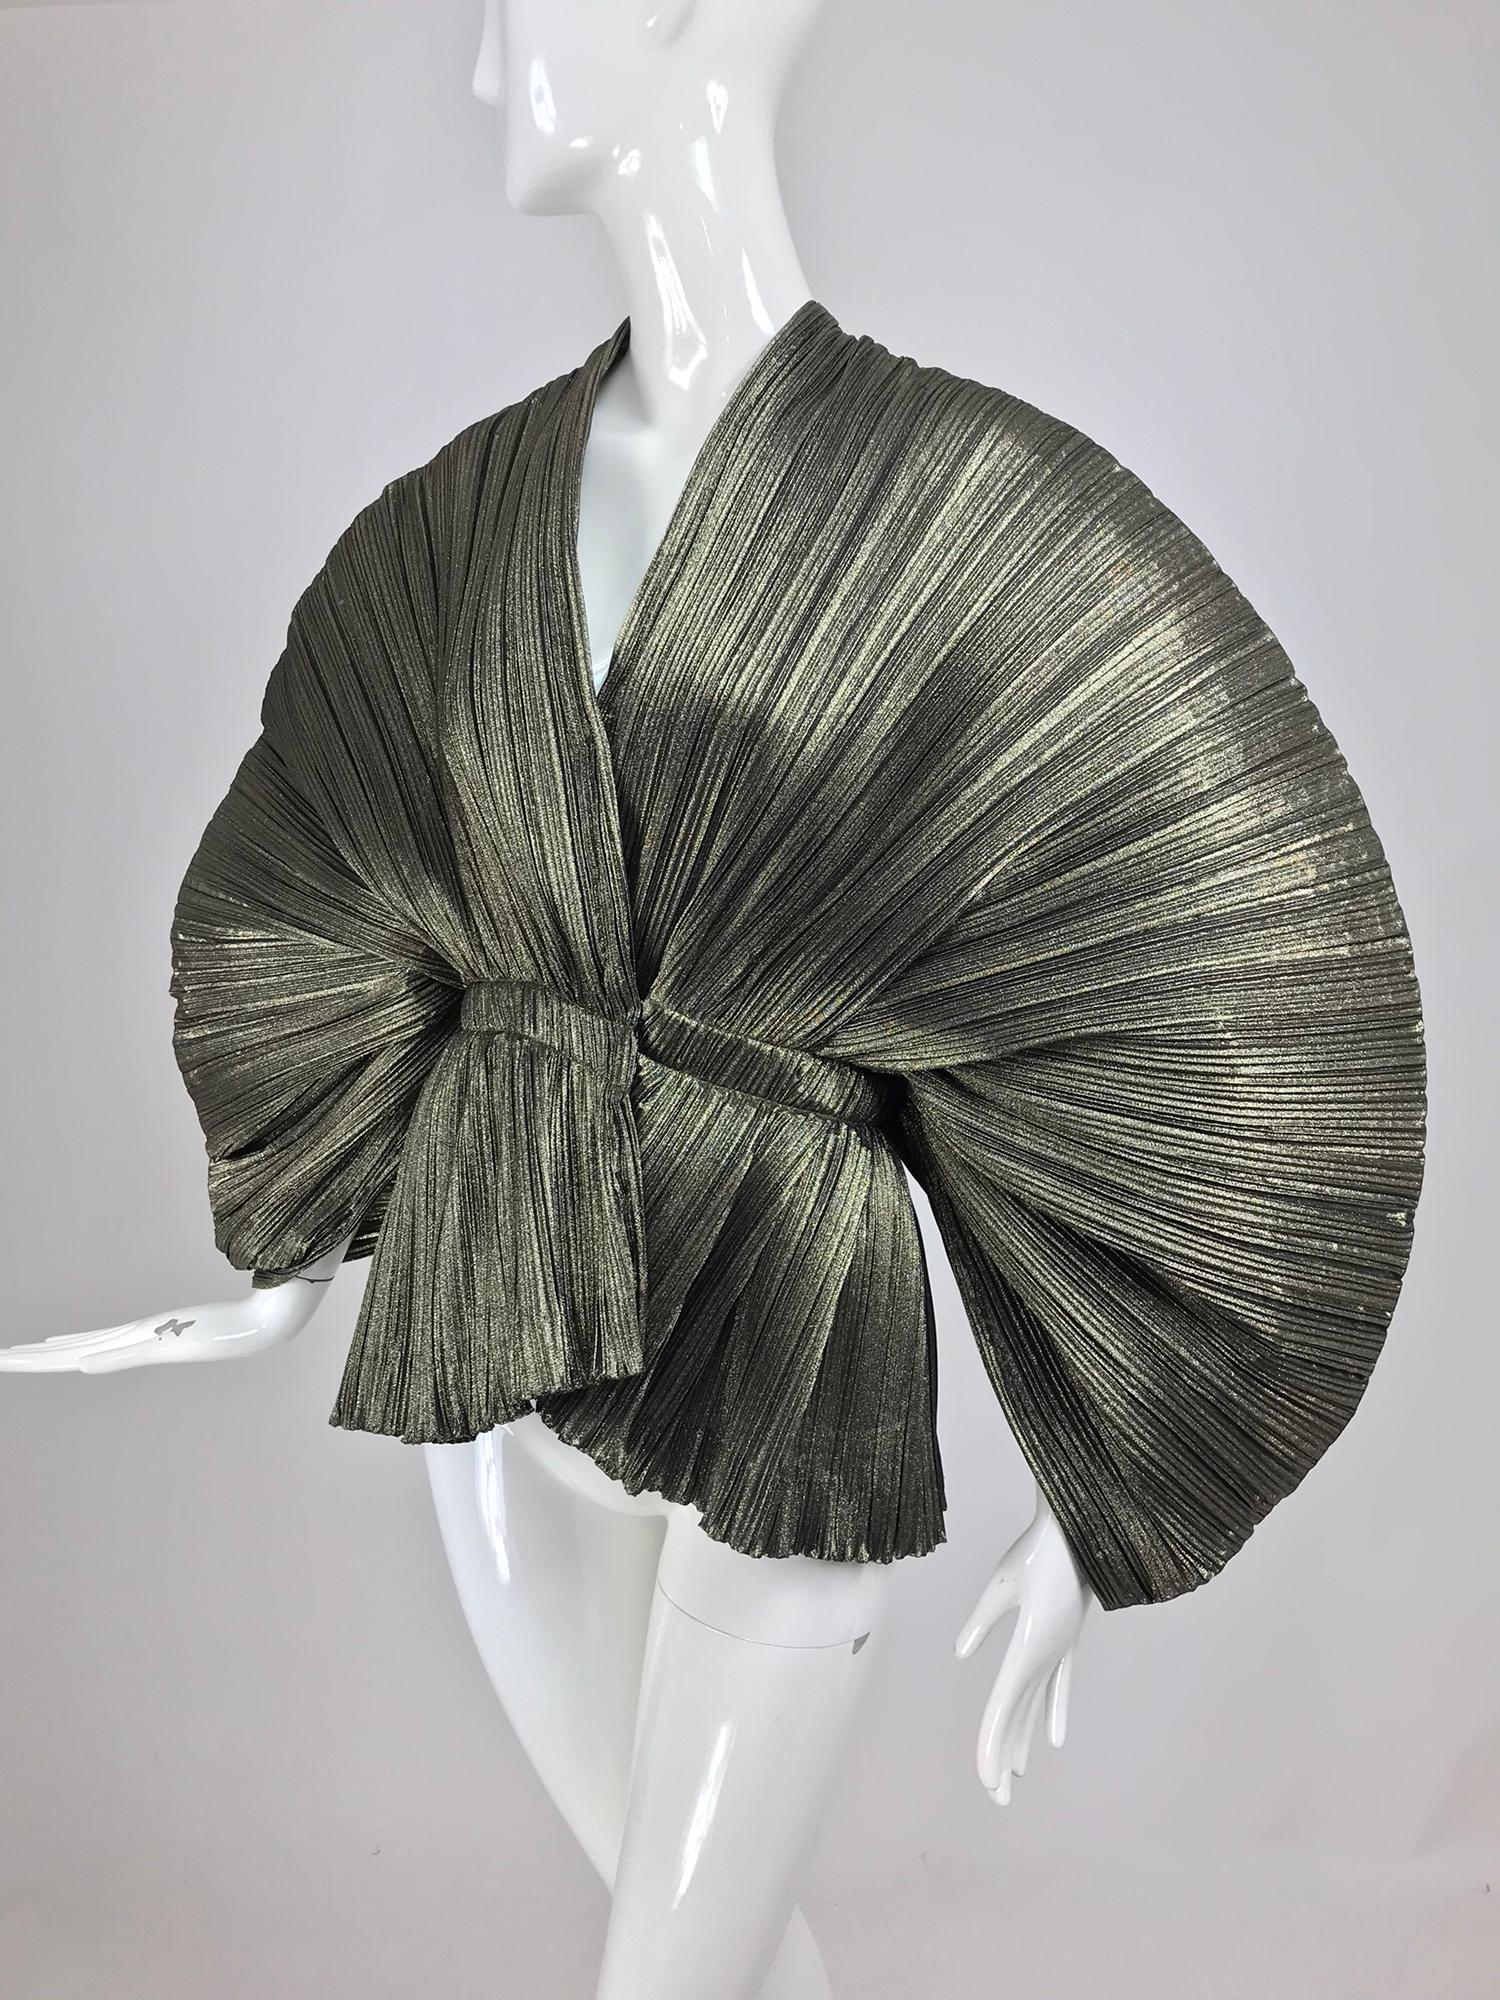 Avant Garde gold metallic accordion pleated sculpture jacket. This amazing and unique jacket is sure to cause a sensation wherever it's worn. Made from a bronze/gold permanently pleated metallic fabric that calls to mind Issey Miyake's designs.